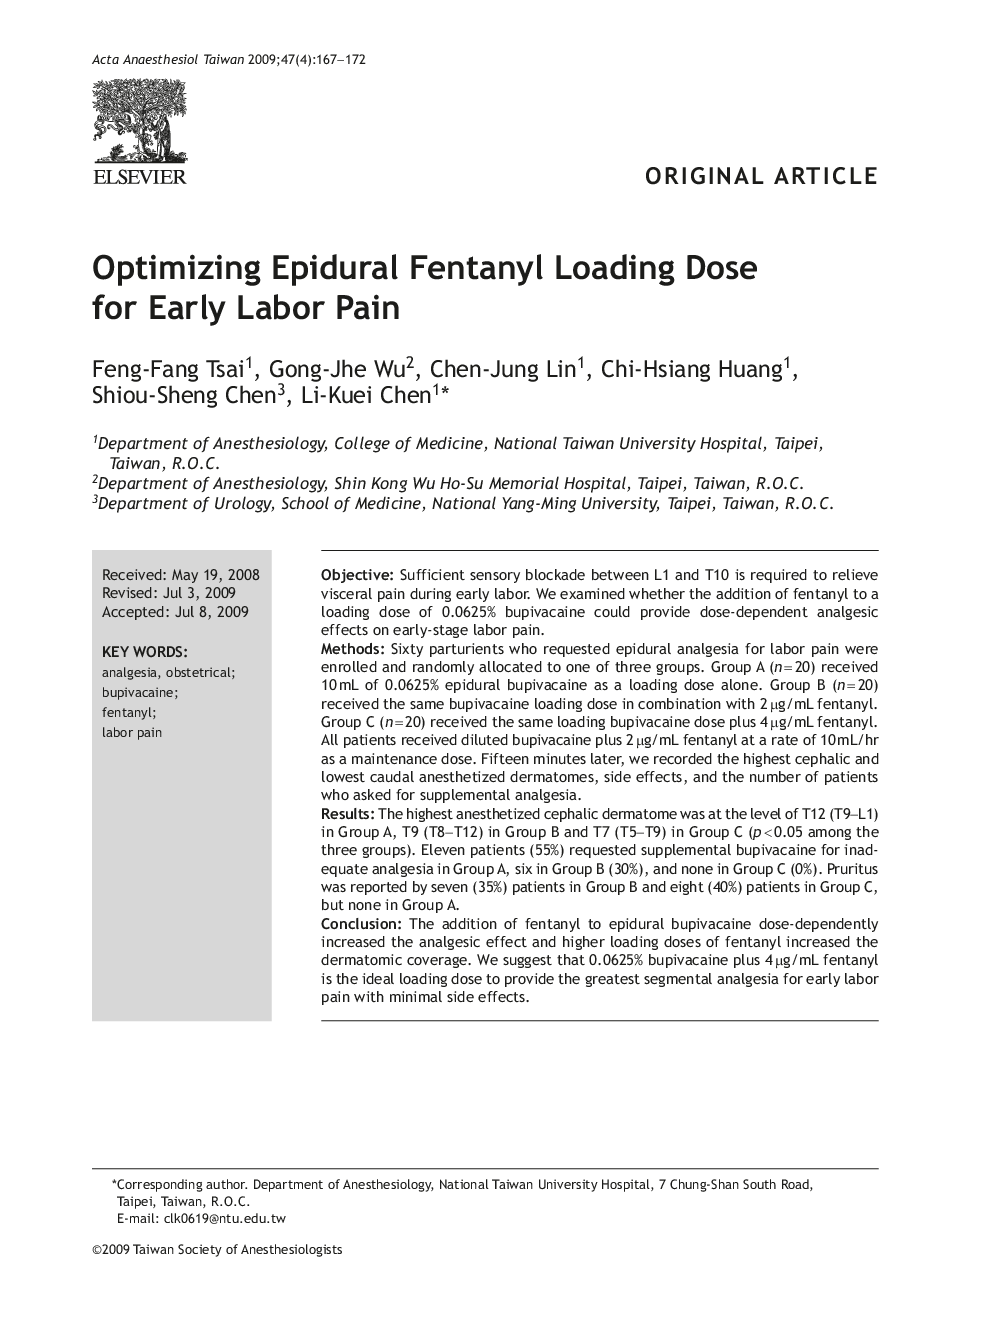 Optimizing Epidural Fentanyl Loading Dose for Early Labor Pain